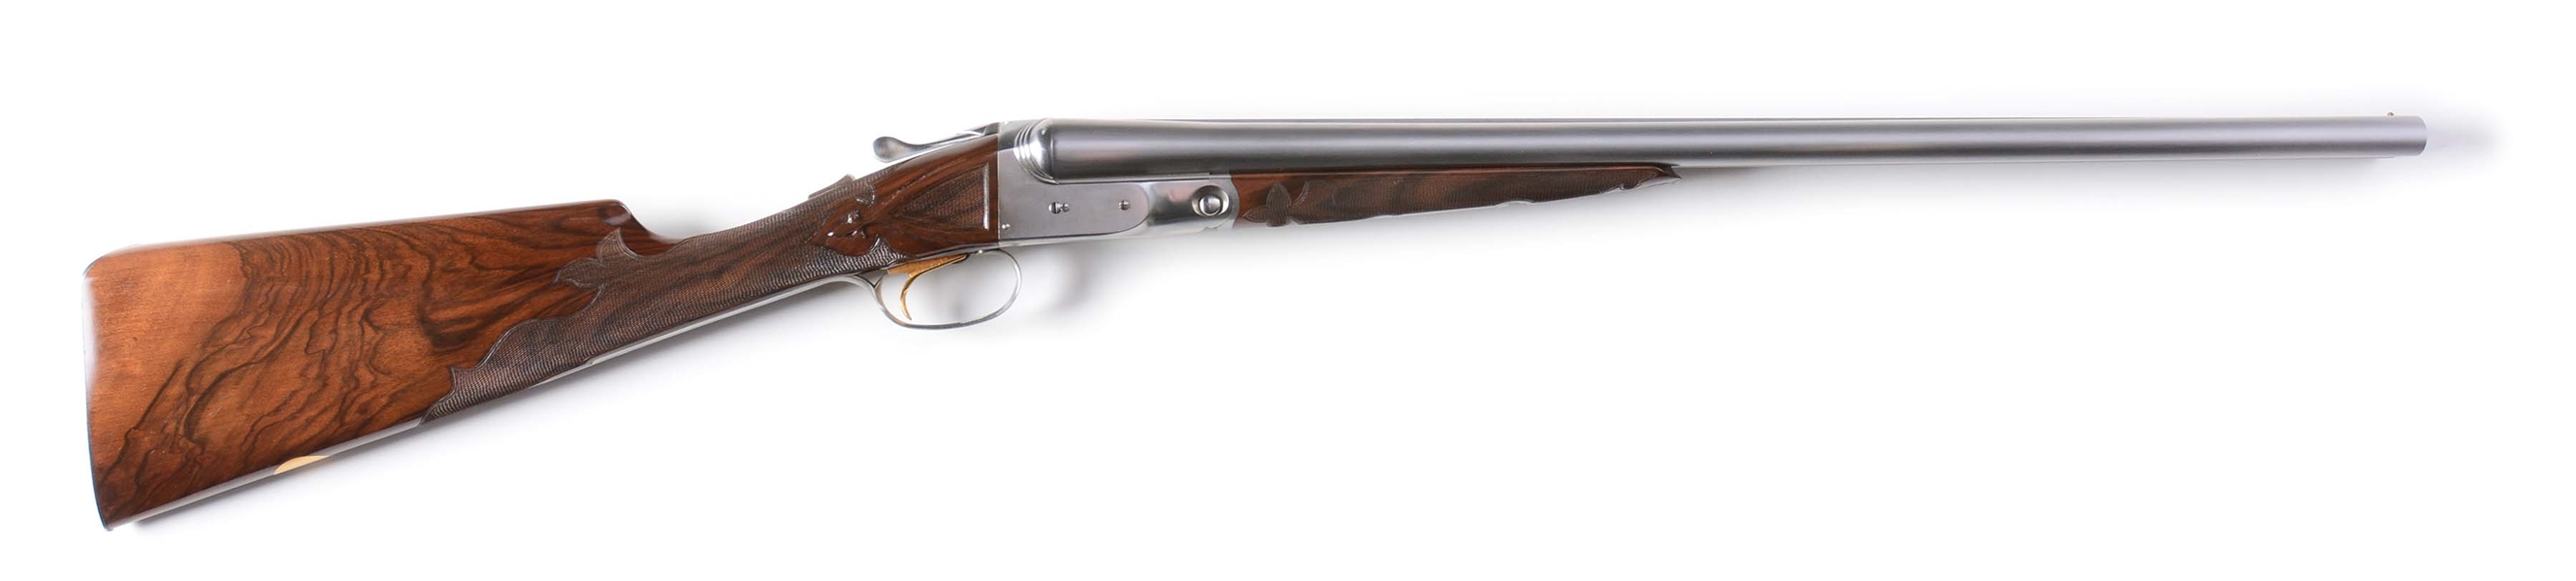 (M) PARKER REPRODUCTION A1 SPECIAL 12 GAUGE SHOTGUN IN THE WHITE IN ITS ORIGINAL CASE AND BOX